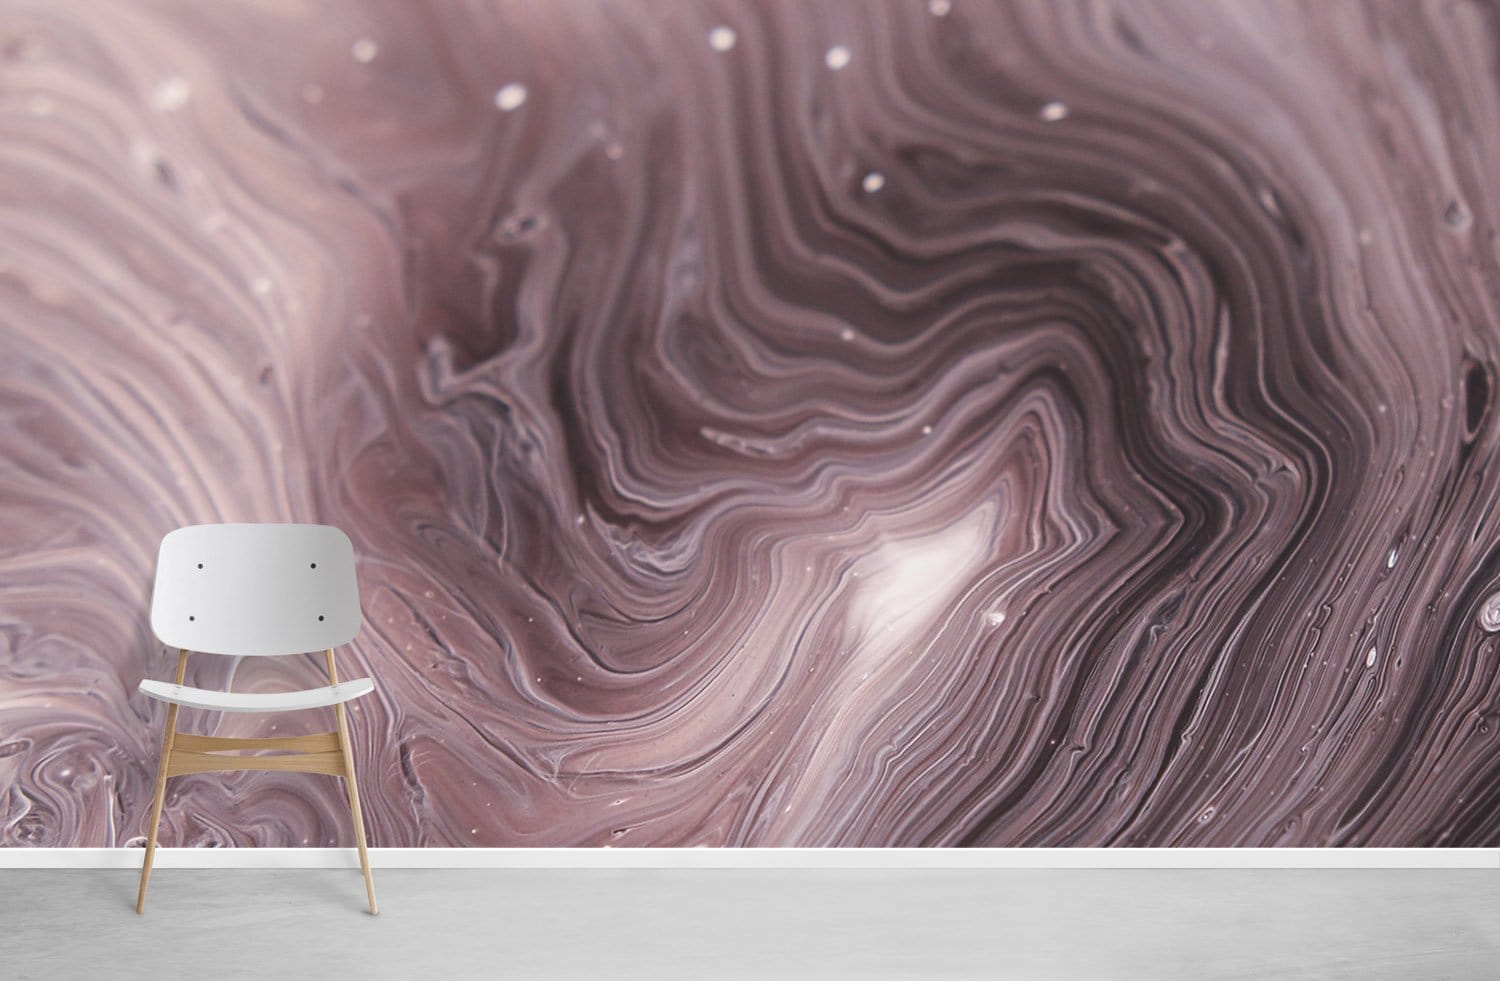 Home Decoration Featuring a Wallpaper Mural of a Vortex River